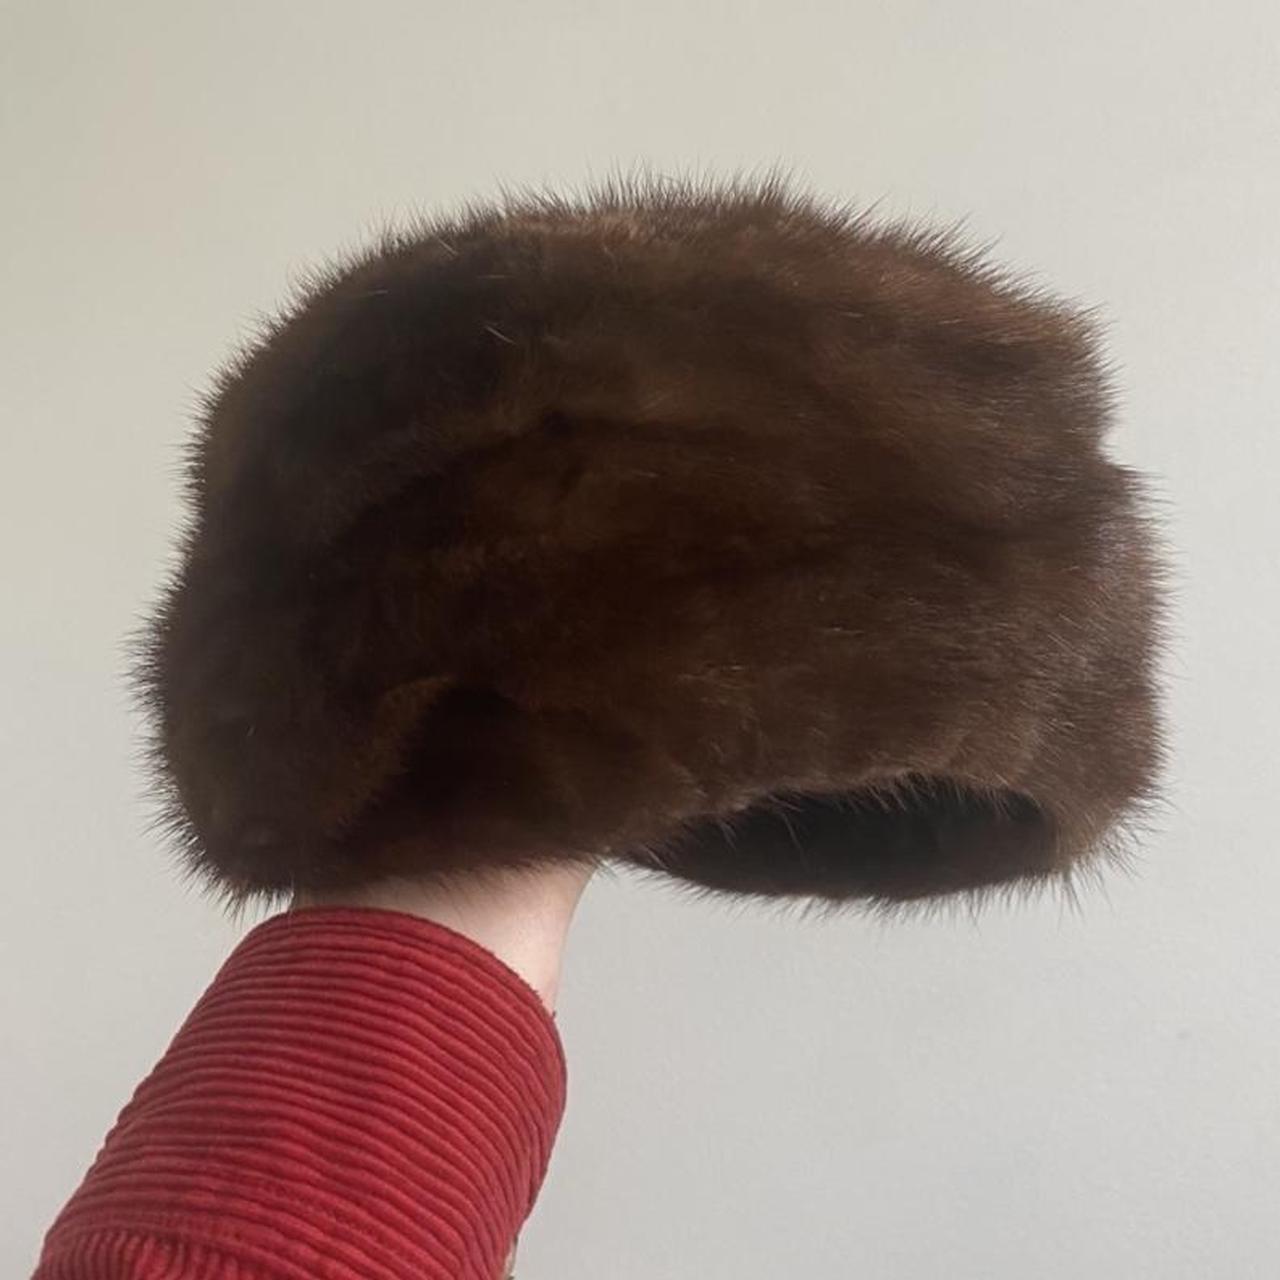 Fur Russian style hat good condition. No stretch... - Depop